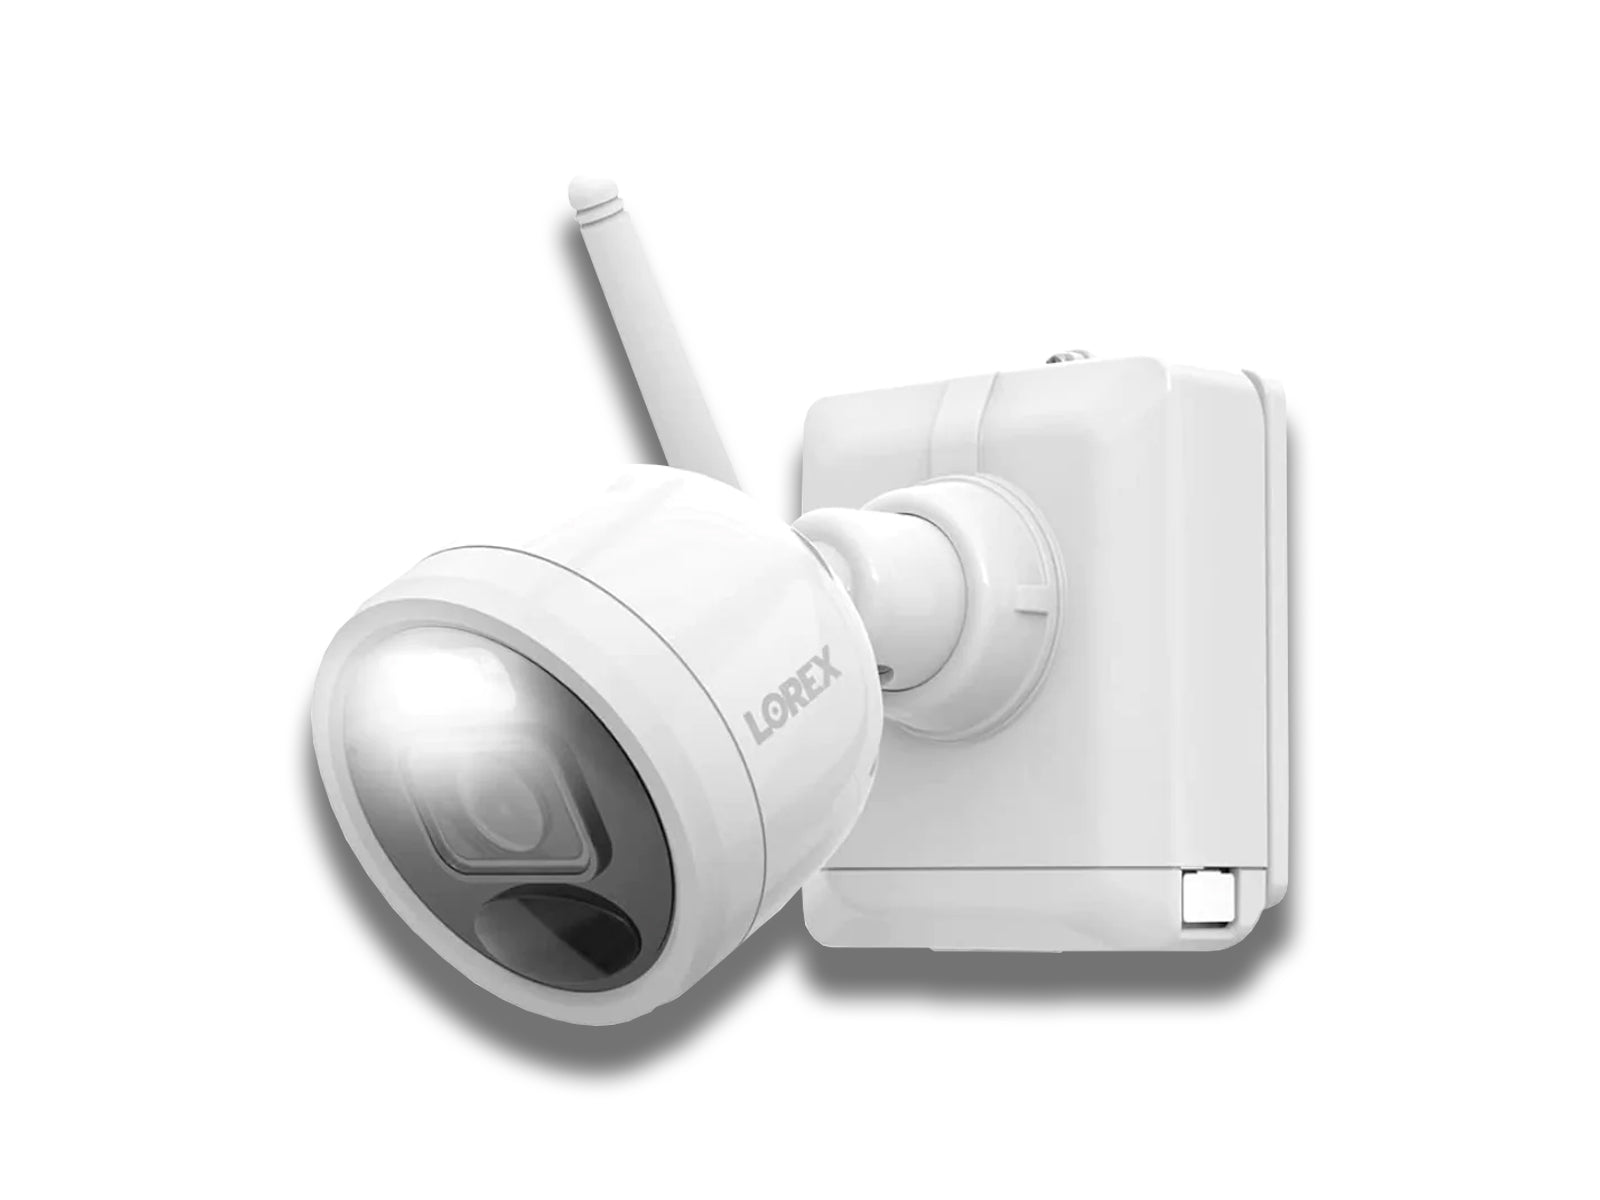 Image shows a side view of the lorex camera on the white background